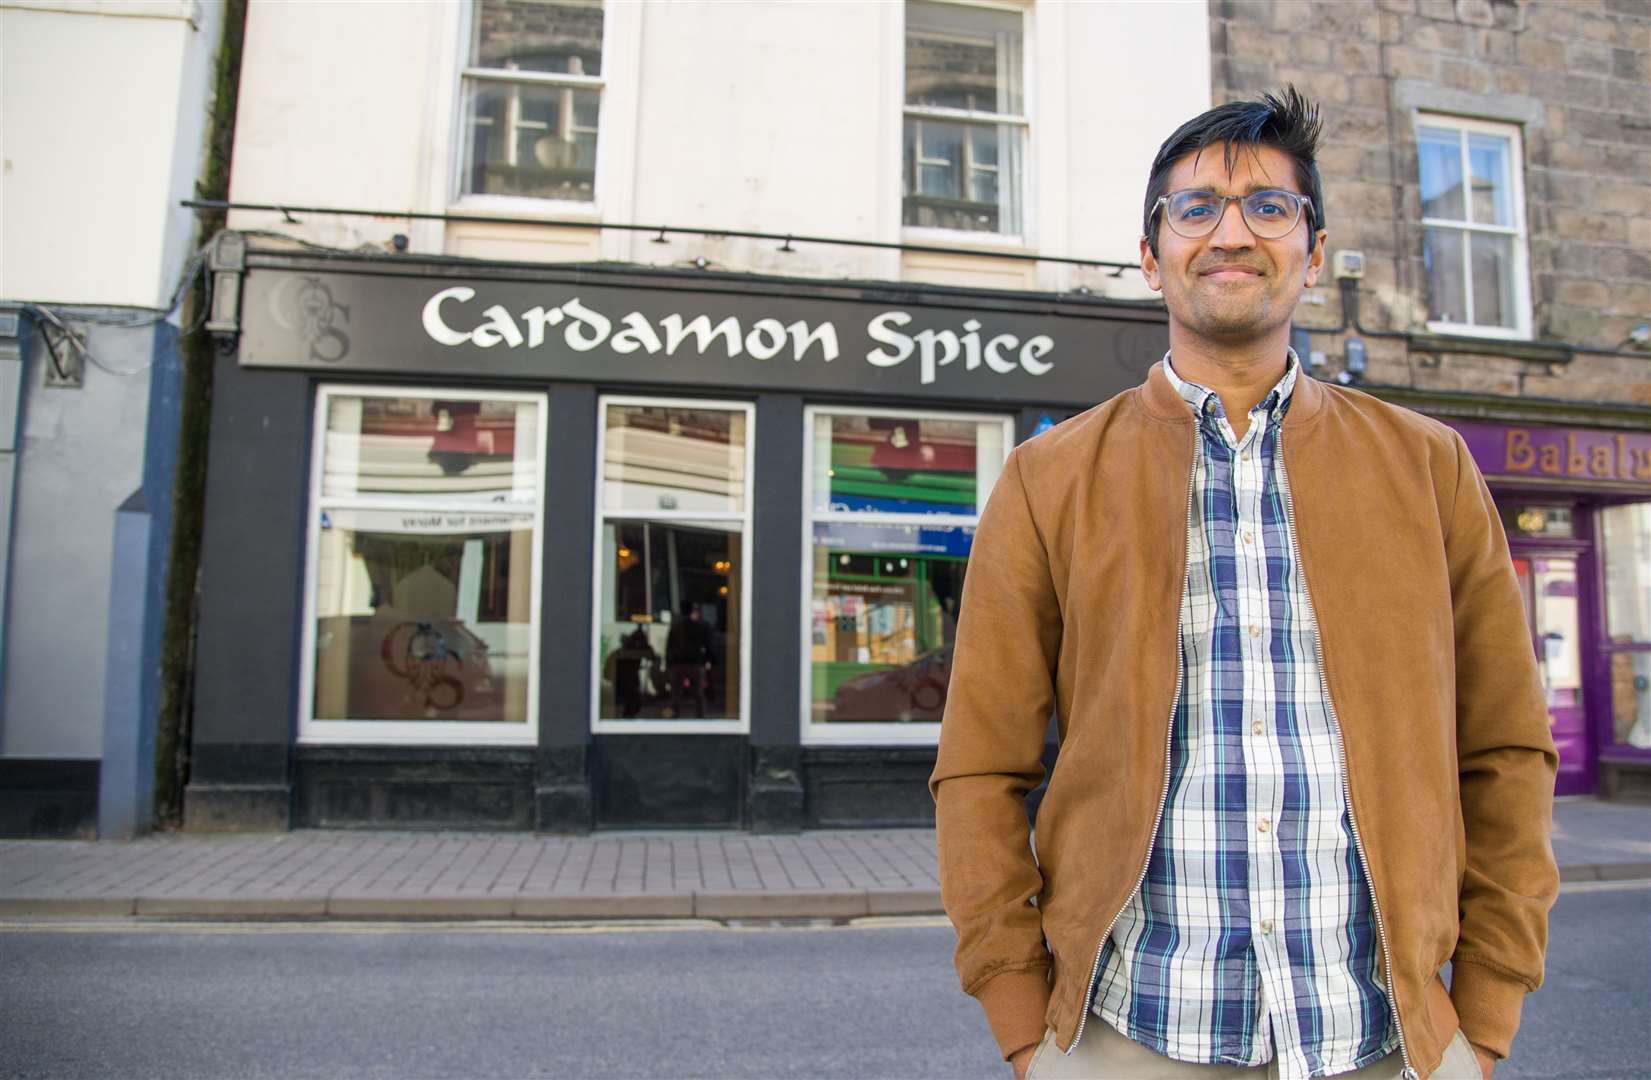 Restaurant owner Hussain is hoping to give something back to the community that has supported him.